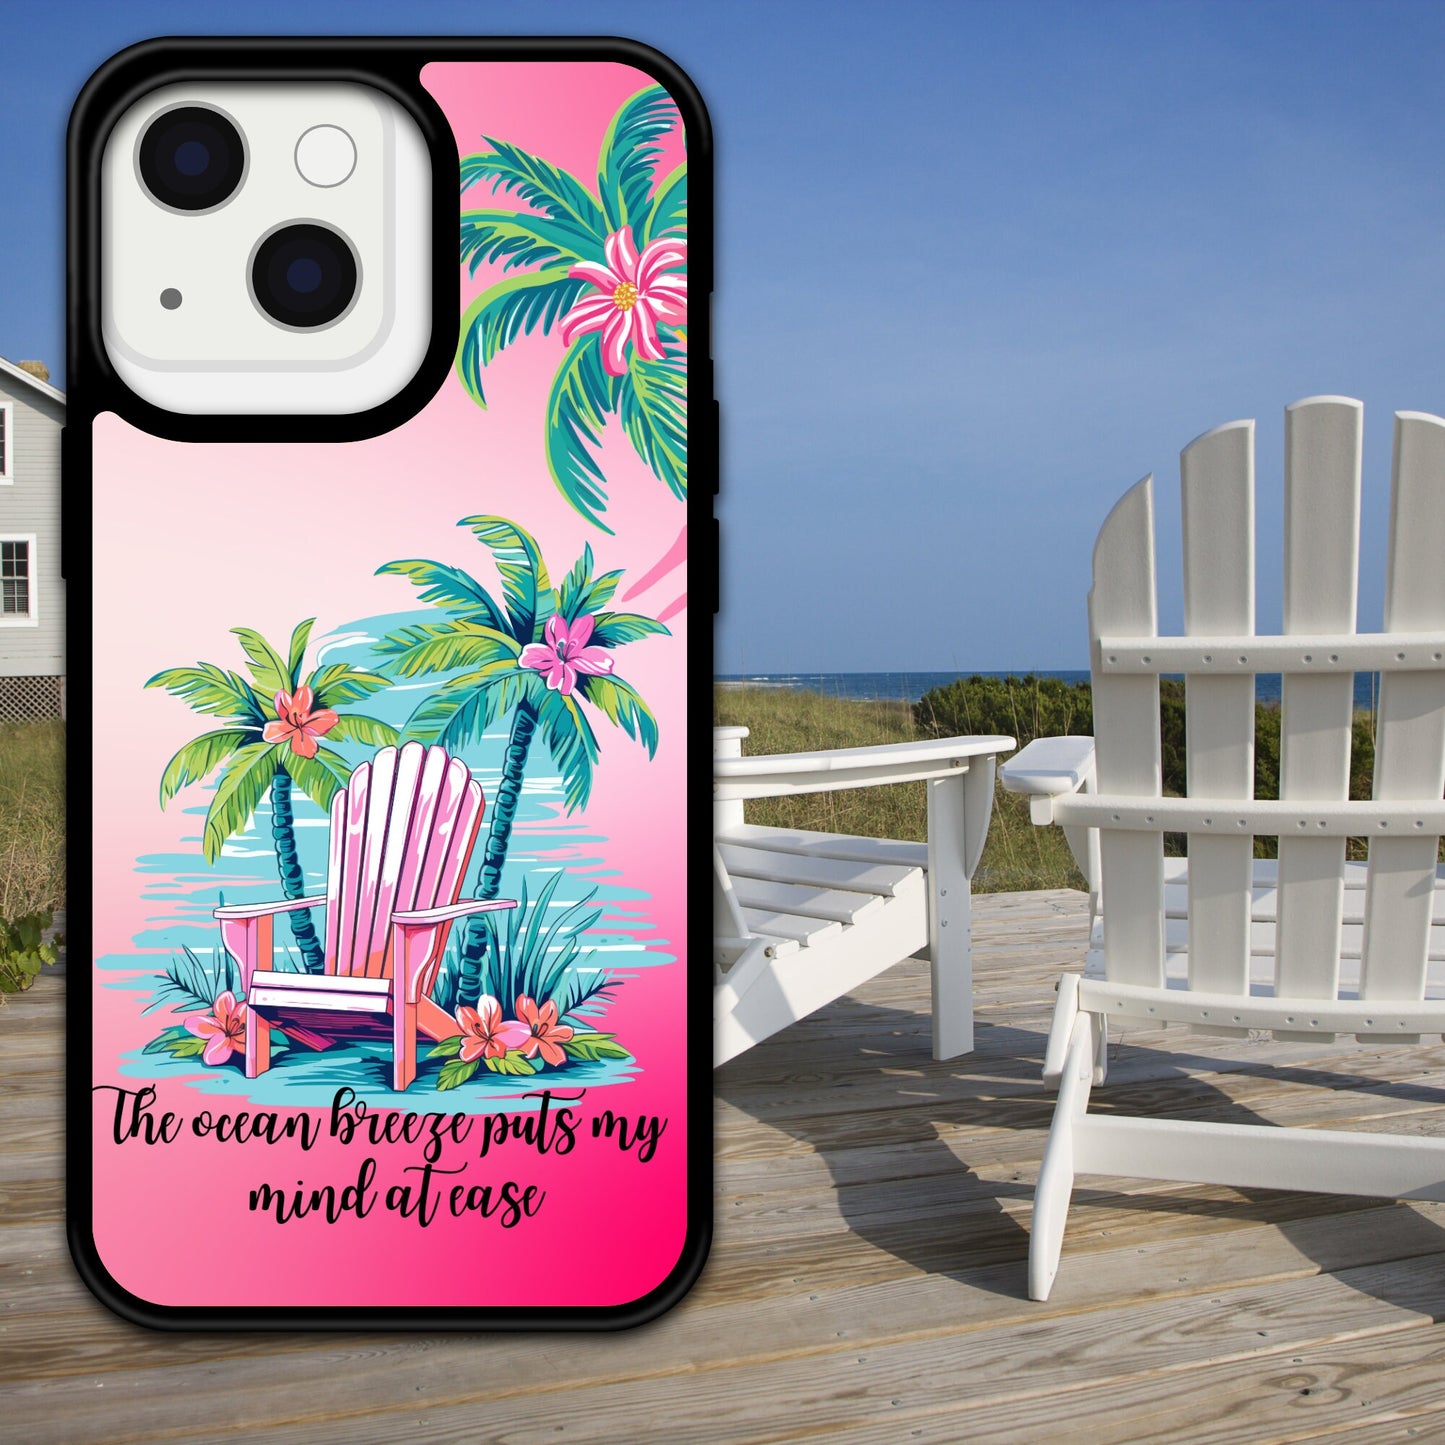 Adirondack Beach Chair Design phone Case/ Cover/ " The Ocean Breeze Puts My Mind At Ease"/Compatible with iPhones & Samsung